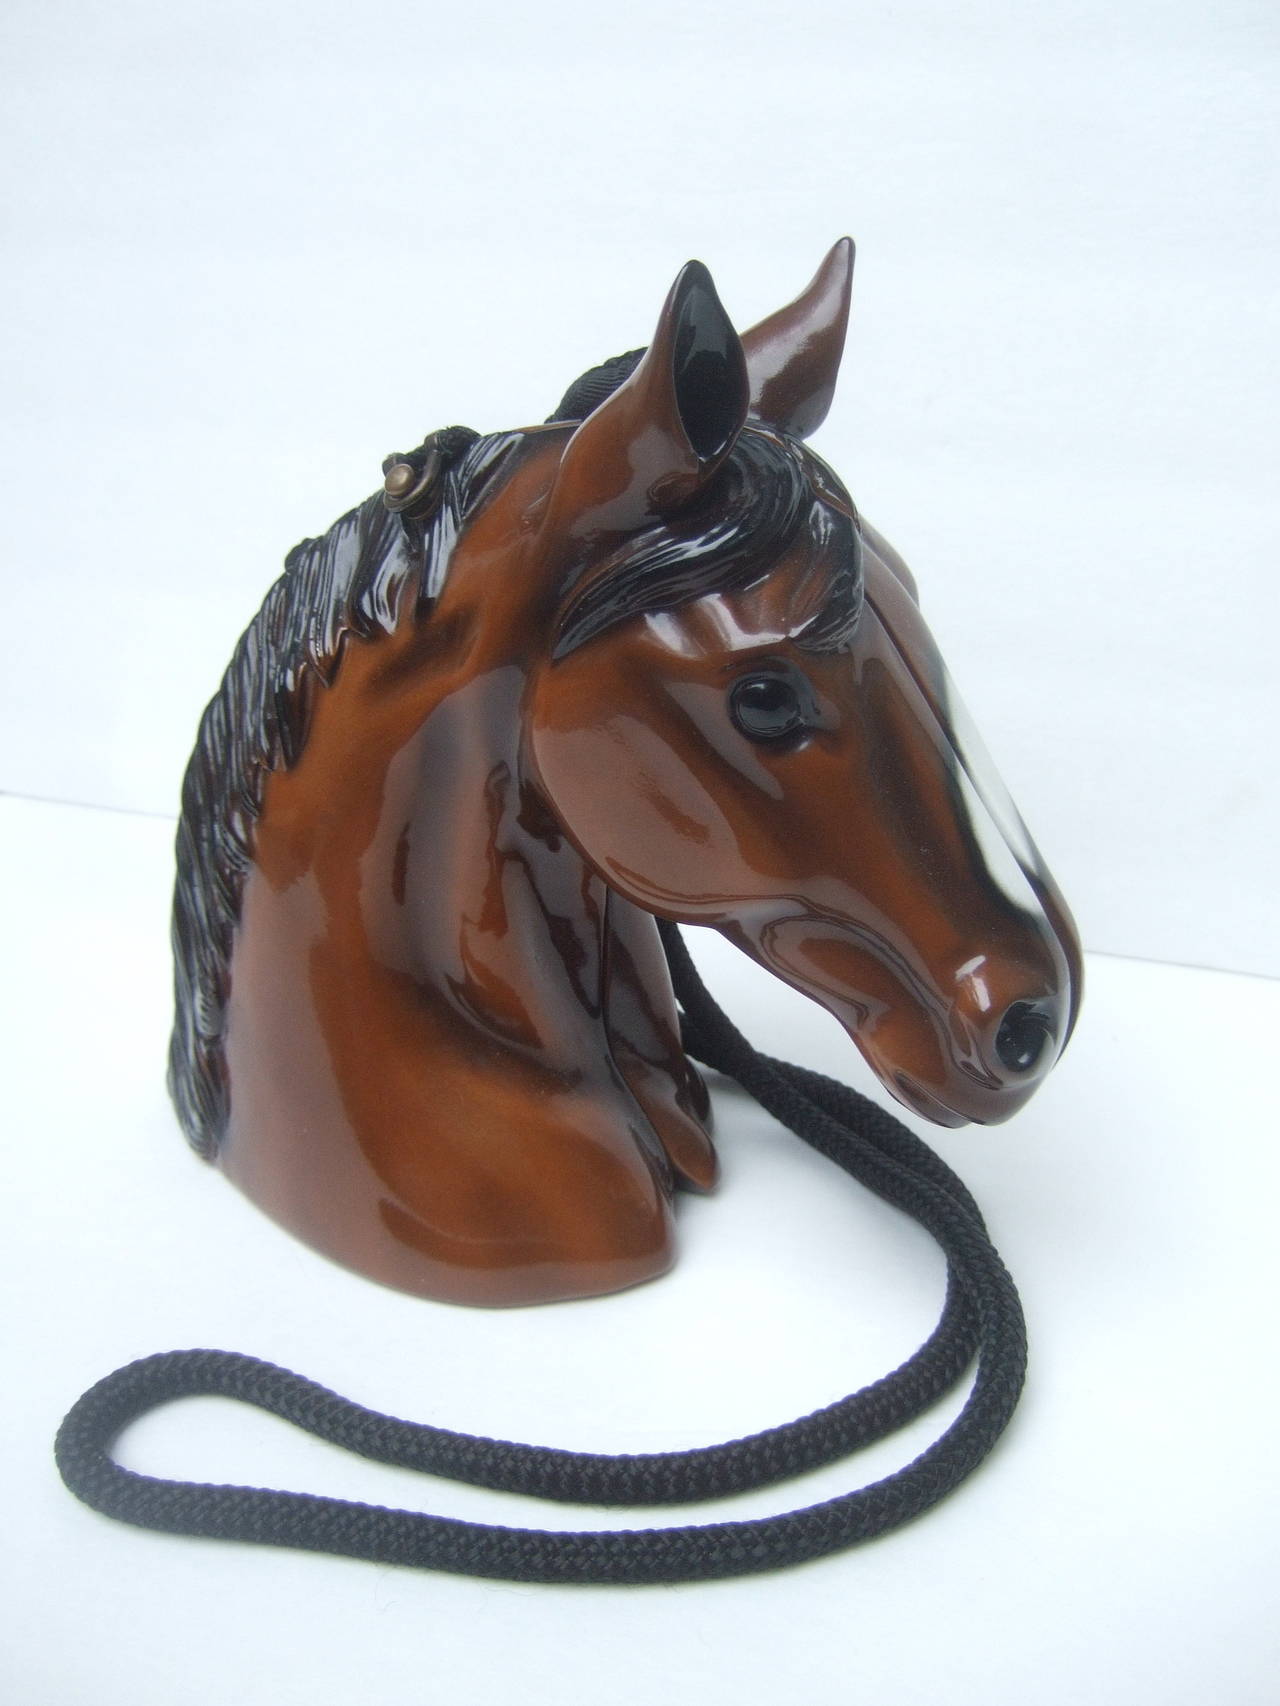 Timmy Woods Beverly Hills Horse head artisan handbag
The unique wood handbag is designed from fallen acacia trees
in the Philippines. The equine theme handbag is covered with
glossy brown, black & white enamel  

The rare horse head shoulder